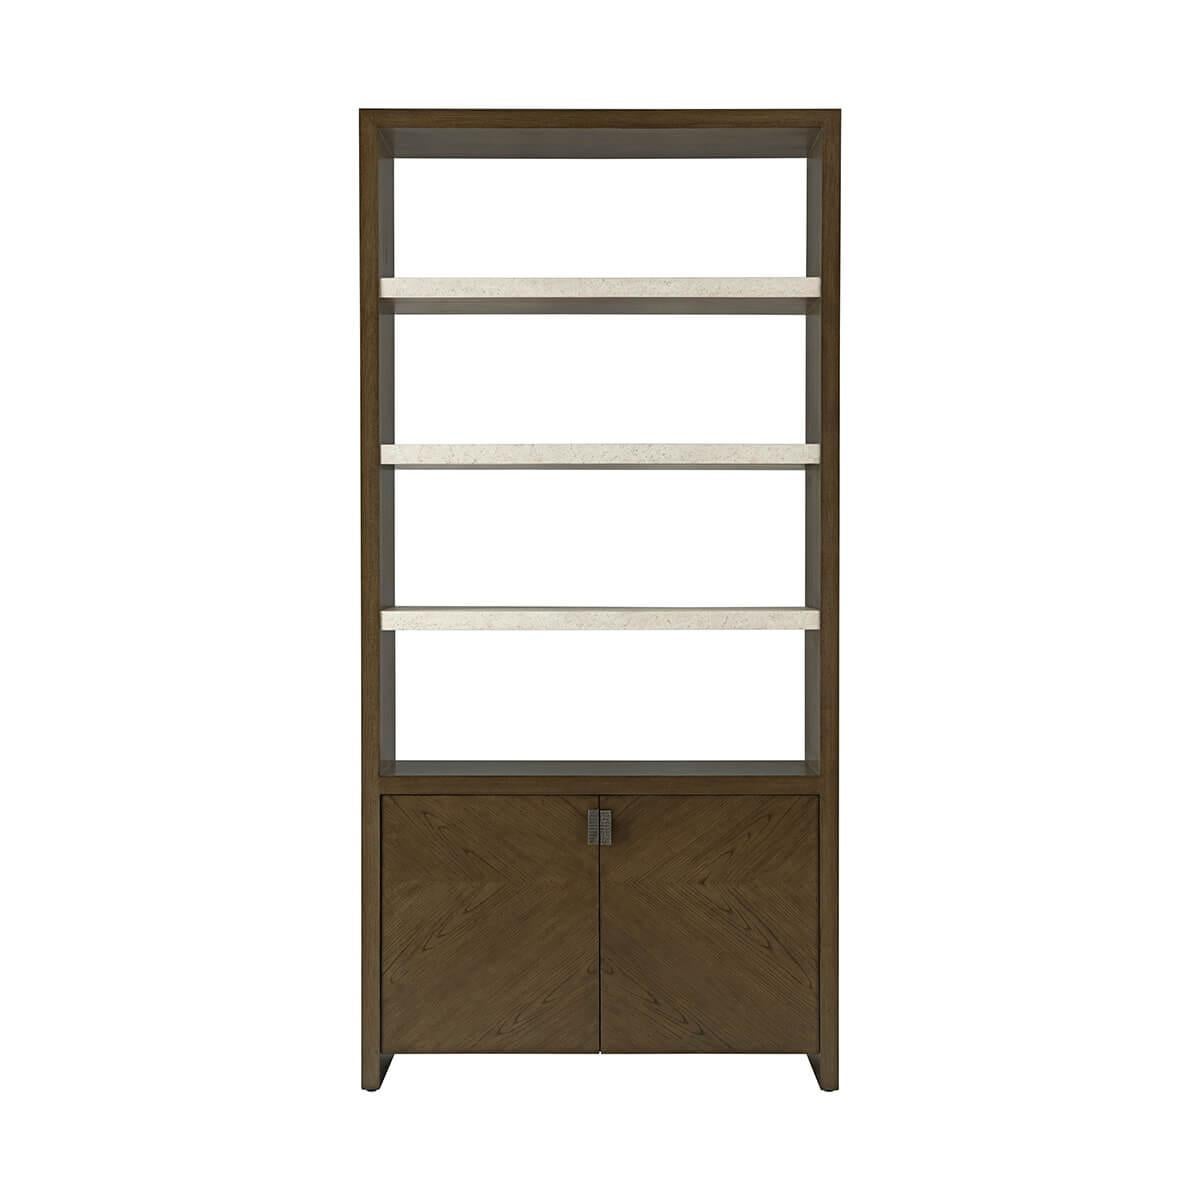 Modern Bookcase is a modern two-door bookcase in figured cathedral ash available in our dark earth finish with metal pulls in Ember. Completed three exposed fixed shelves in our exclusive porous Mineral finish. An adjustable shelf can be found in